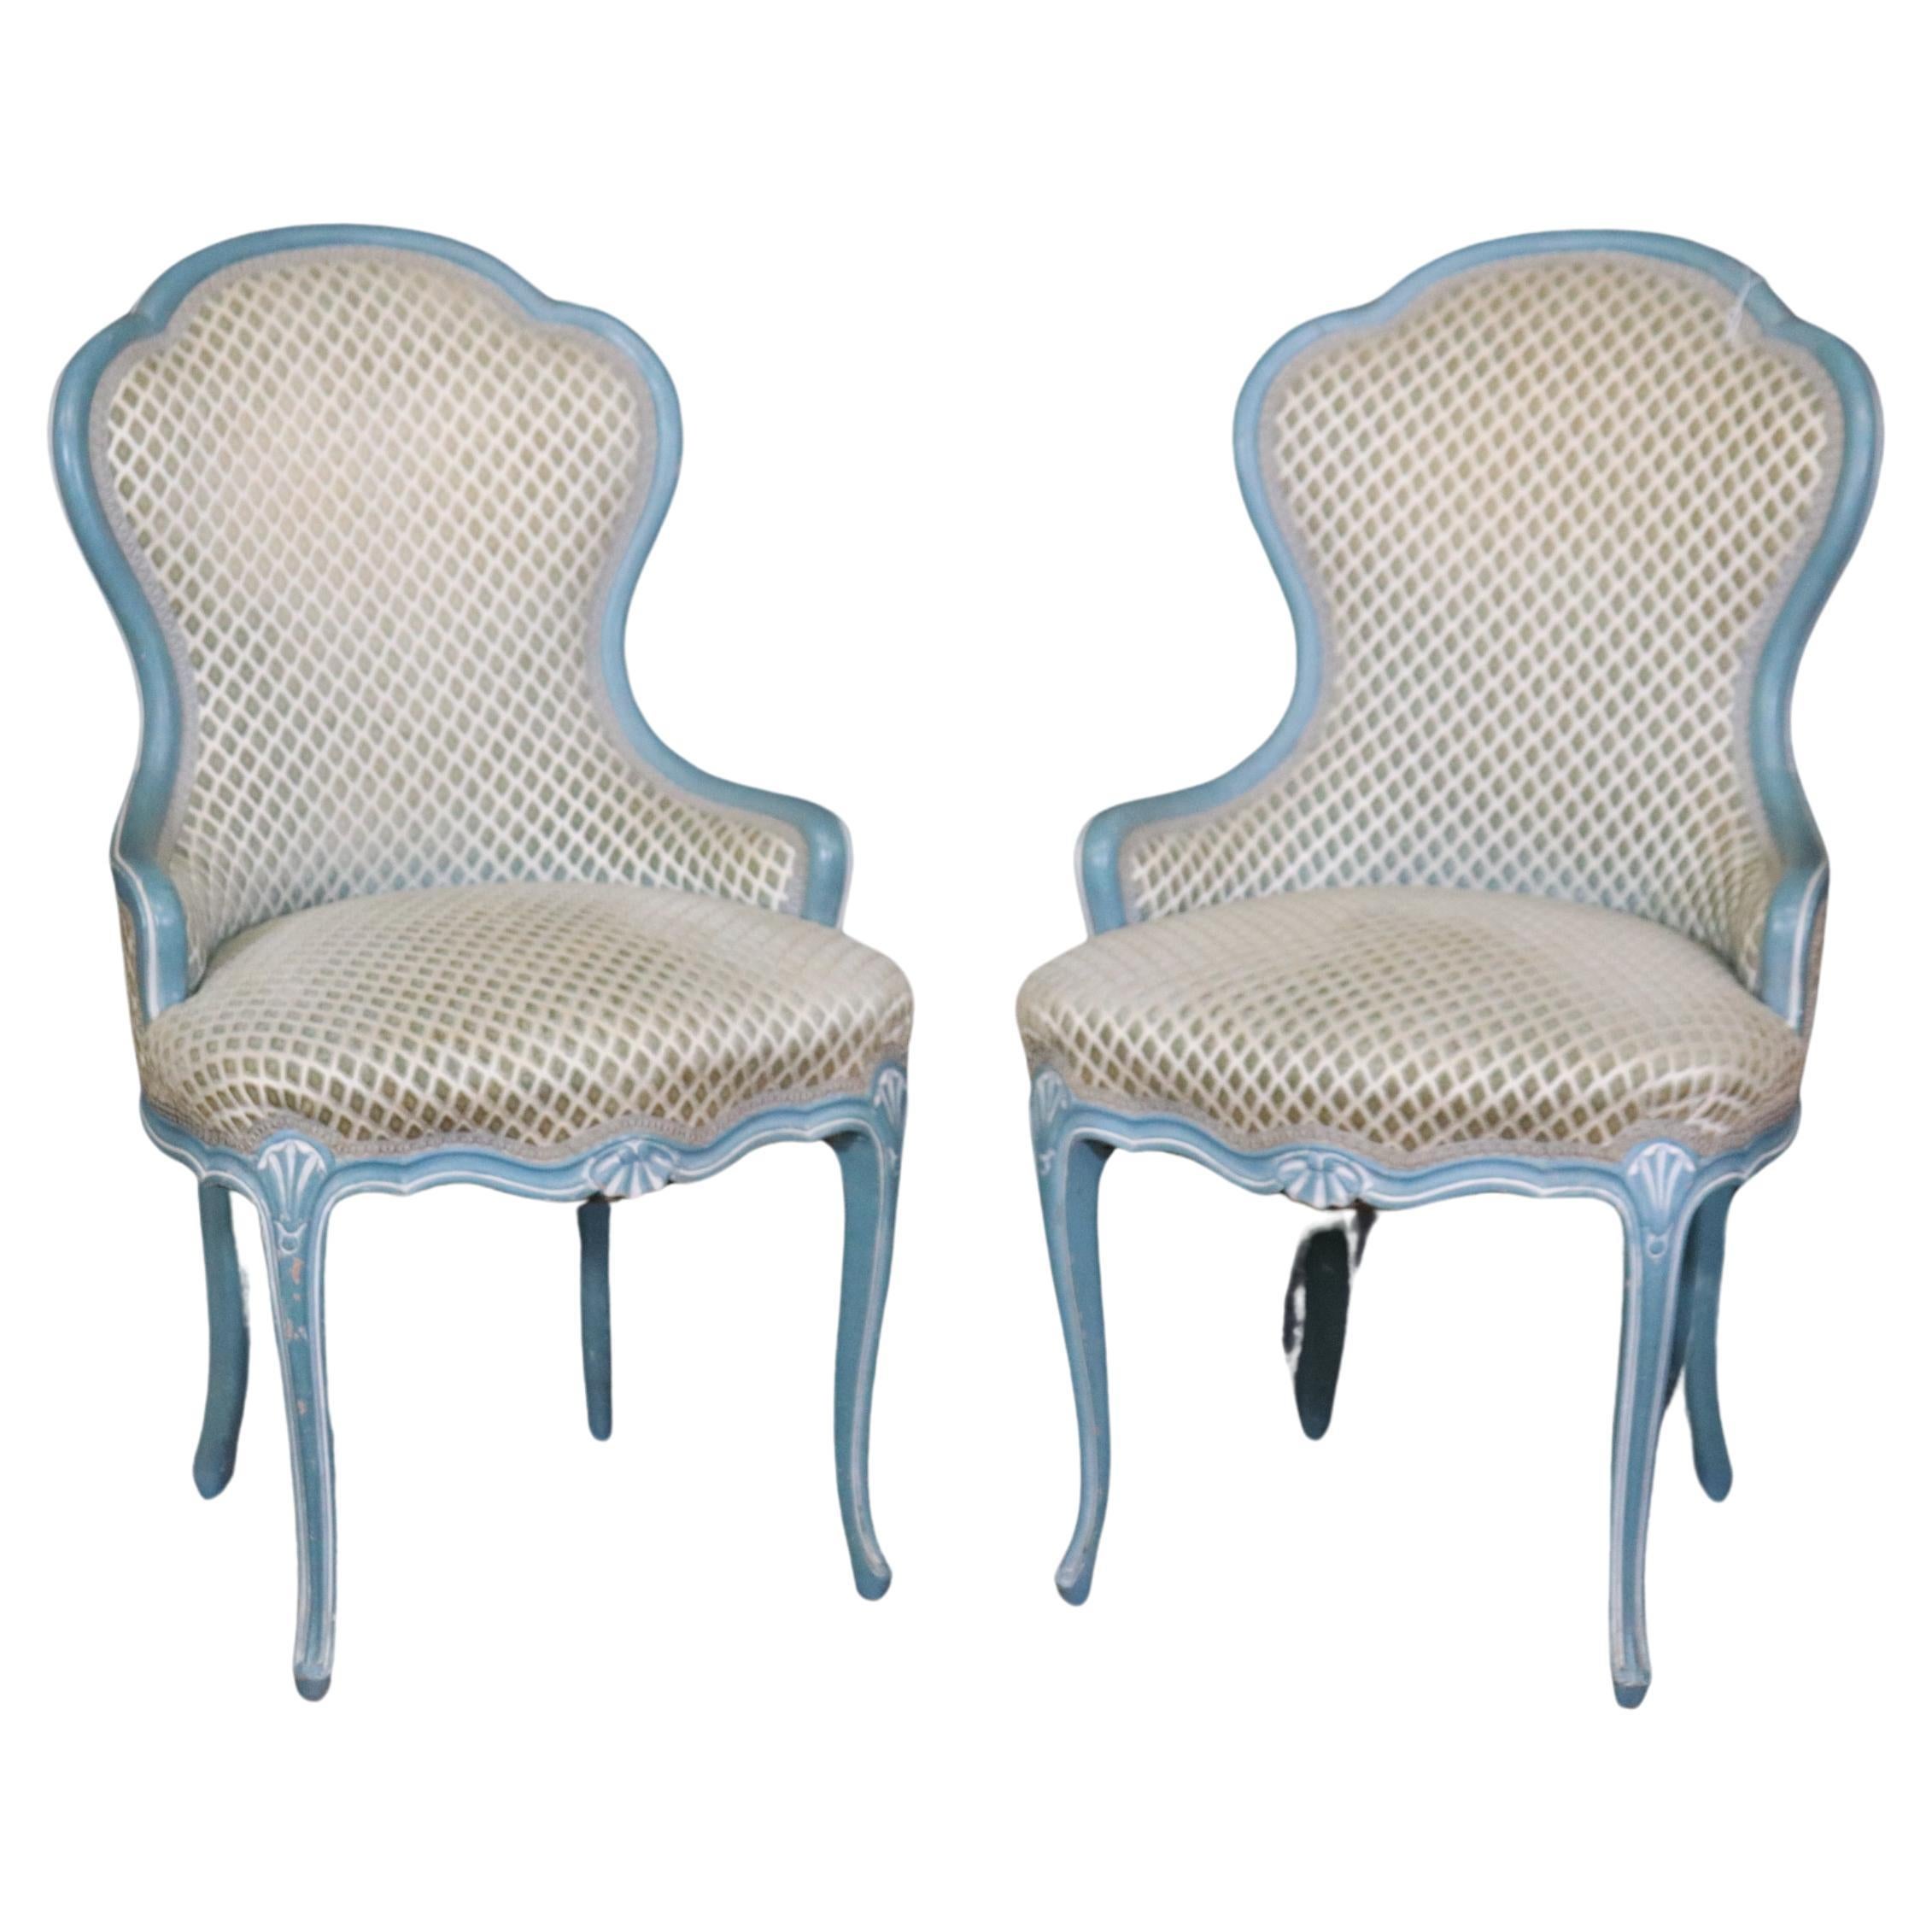 Gorgeous Pair of French Blue and White Painted Louis XV Parlor Boudoir Chairs